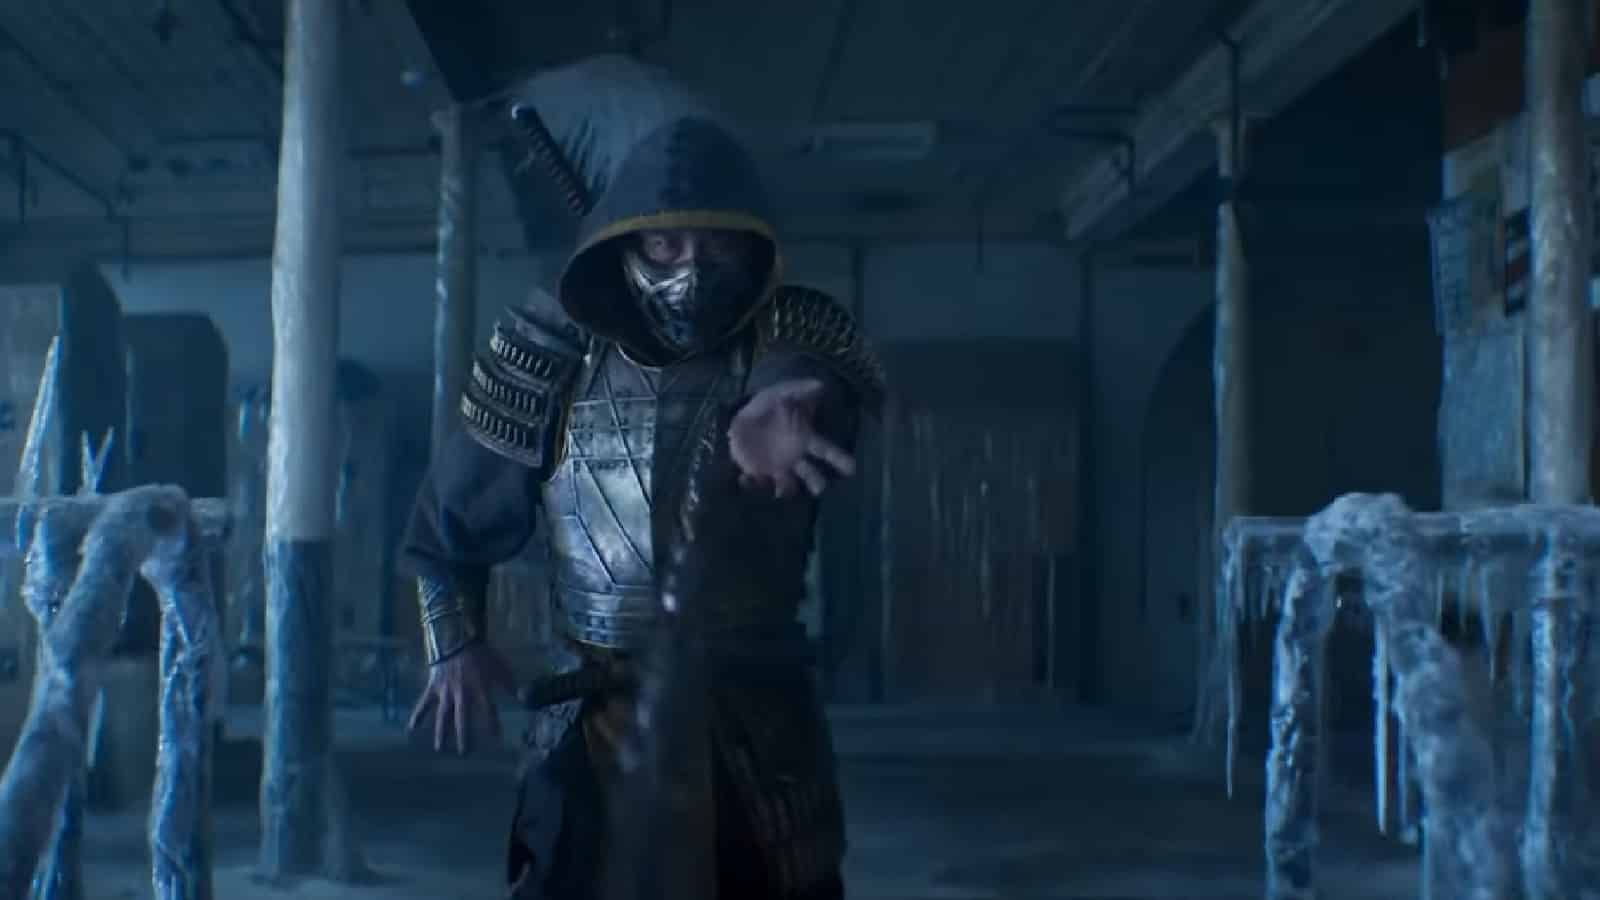 Mortal Kombat 2 Confirms a Fan-Favorite Character for the Live-Action Sequel